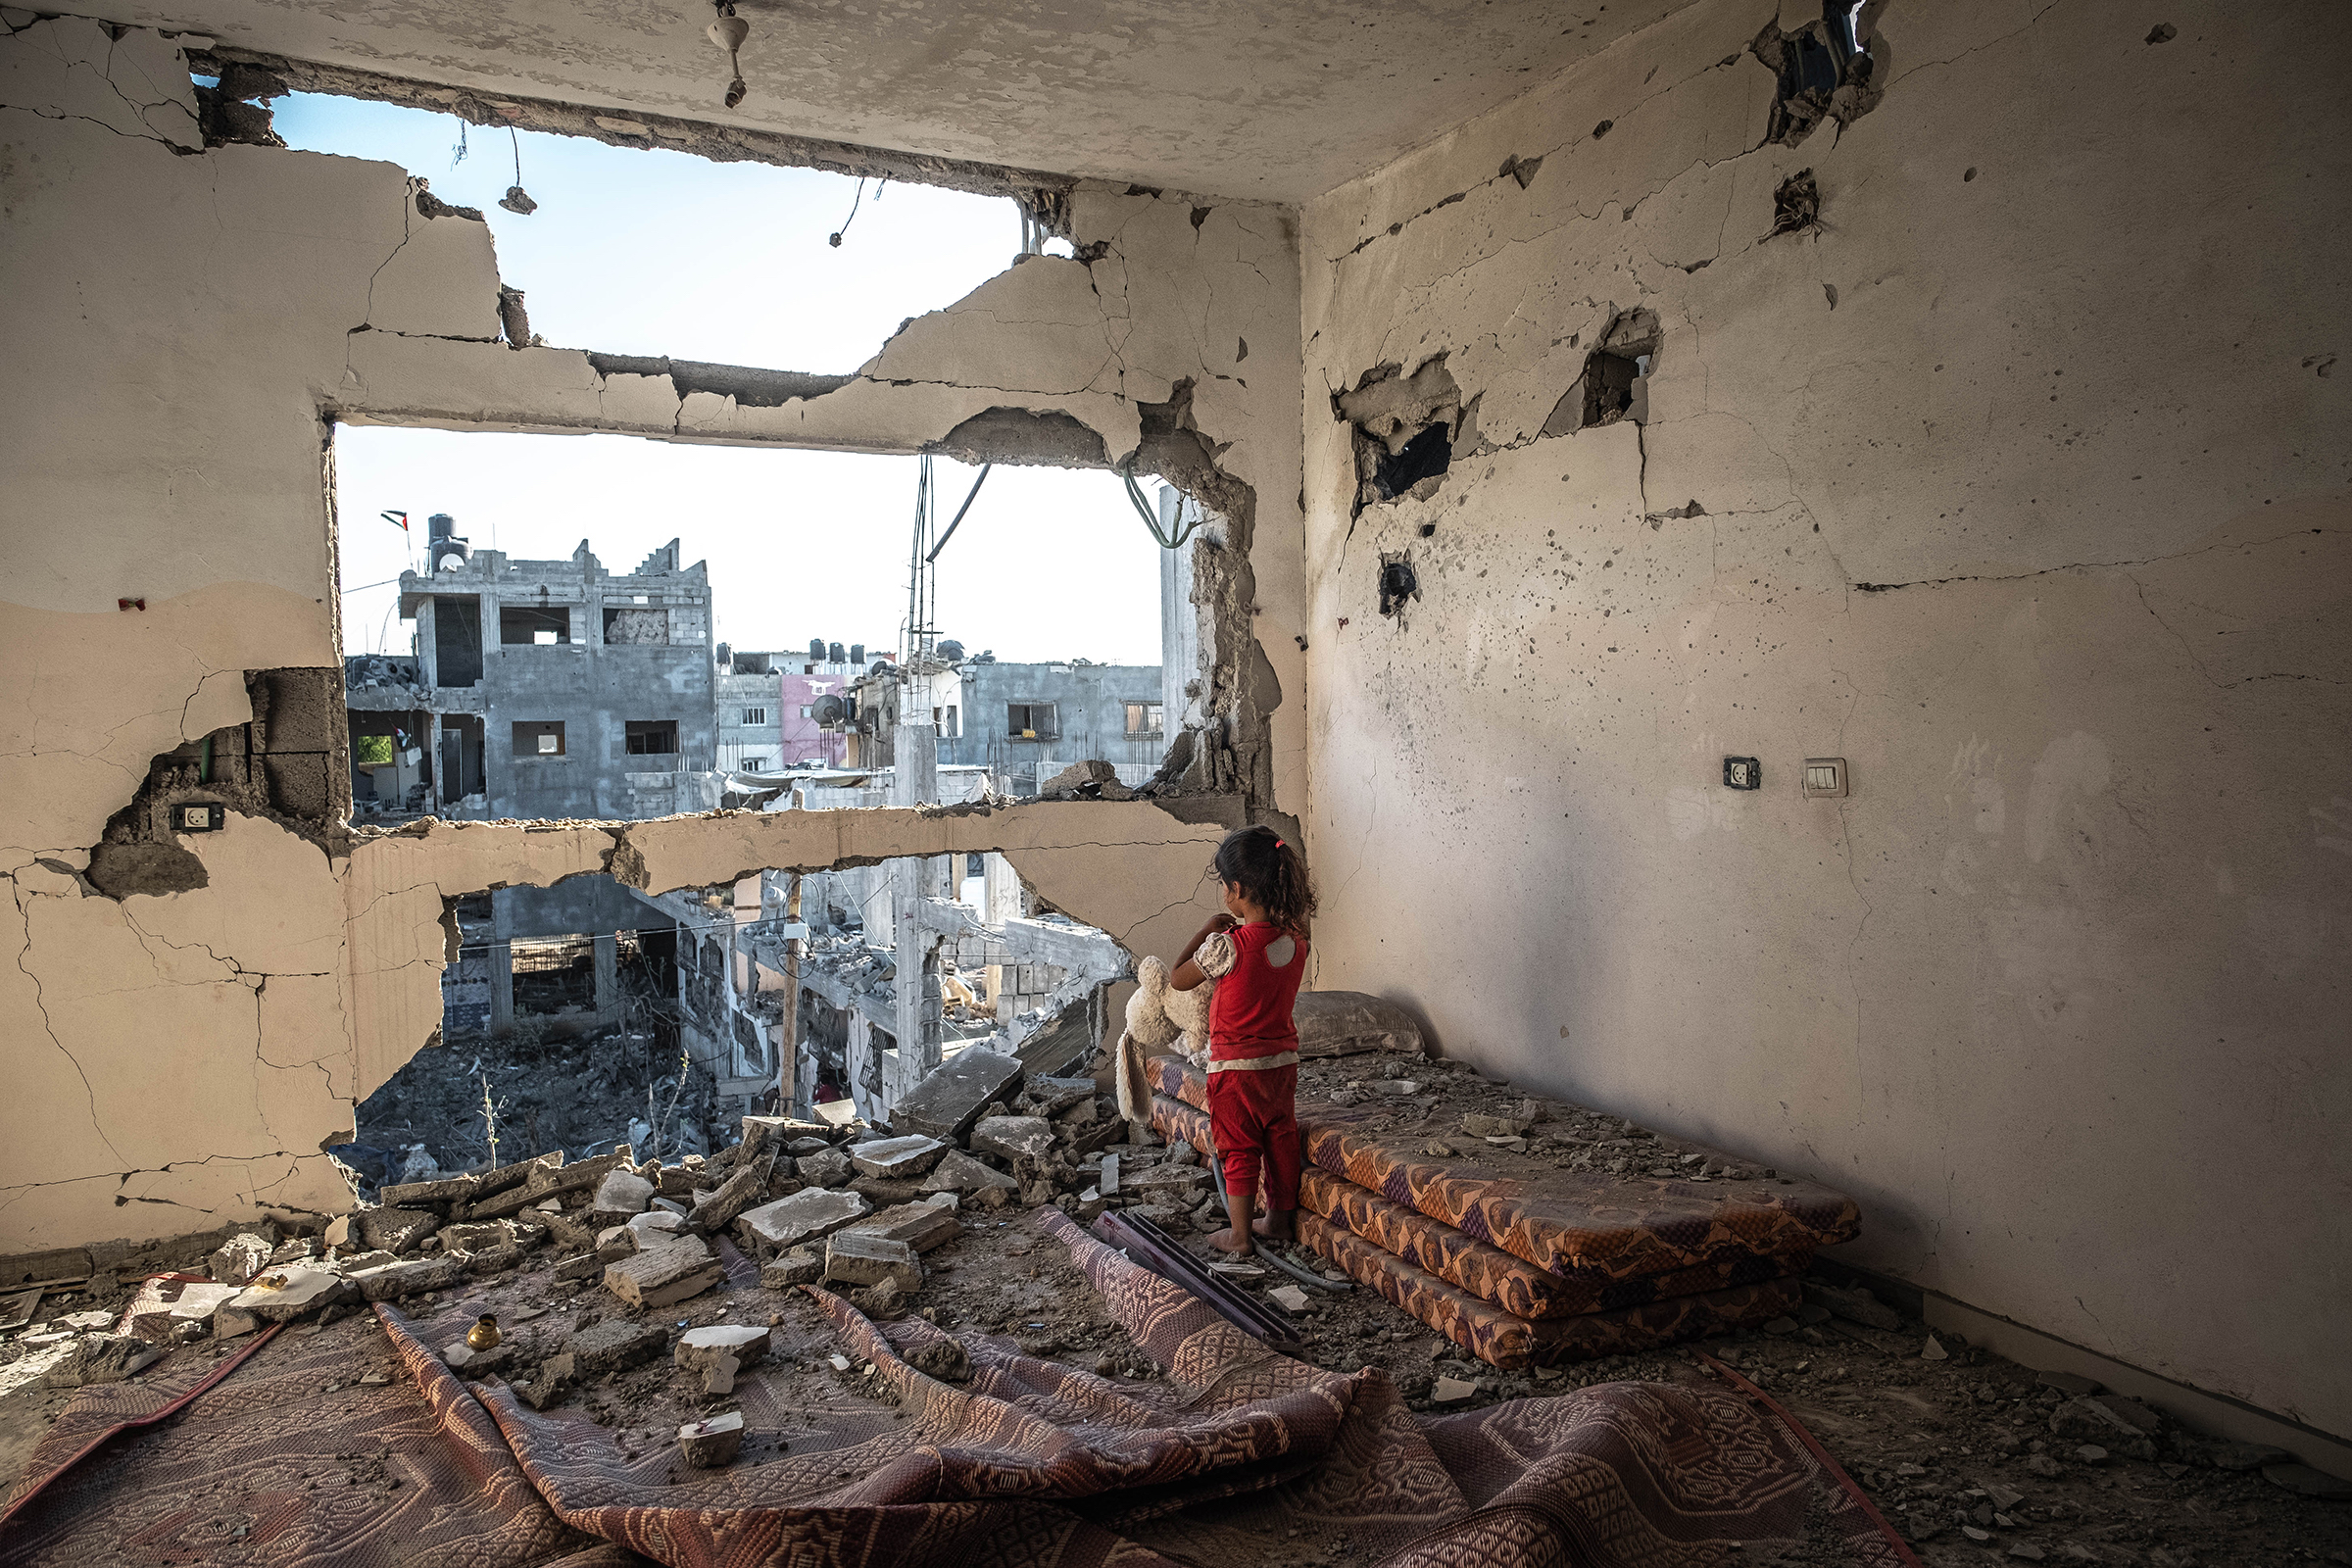 With a cease-fire in effect, a Palestinian girl stands in her destroyed home in Beit Hanoun, Gaza, on May 24. More than 12 in Israel and 250 Palestinians were killed in the deadliest escalation in the conflict since 2014, as unguided rocket fire from Hamas, which governs the 2 million people in Gaza, was answered by Israeli air and artillery strikes. The battle erupted after Israeli authorities moved against Palestinians at sensitive sites inside Israel, including Jerusalem’s al-Aqsa Mosque.